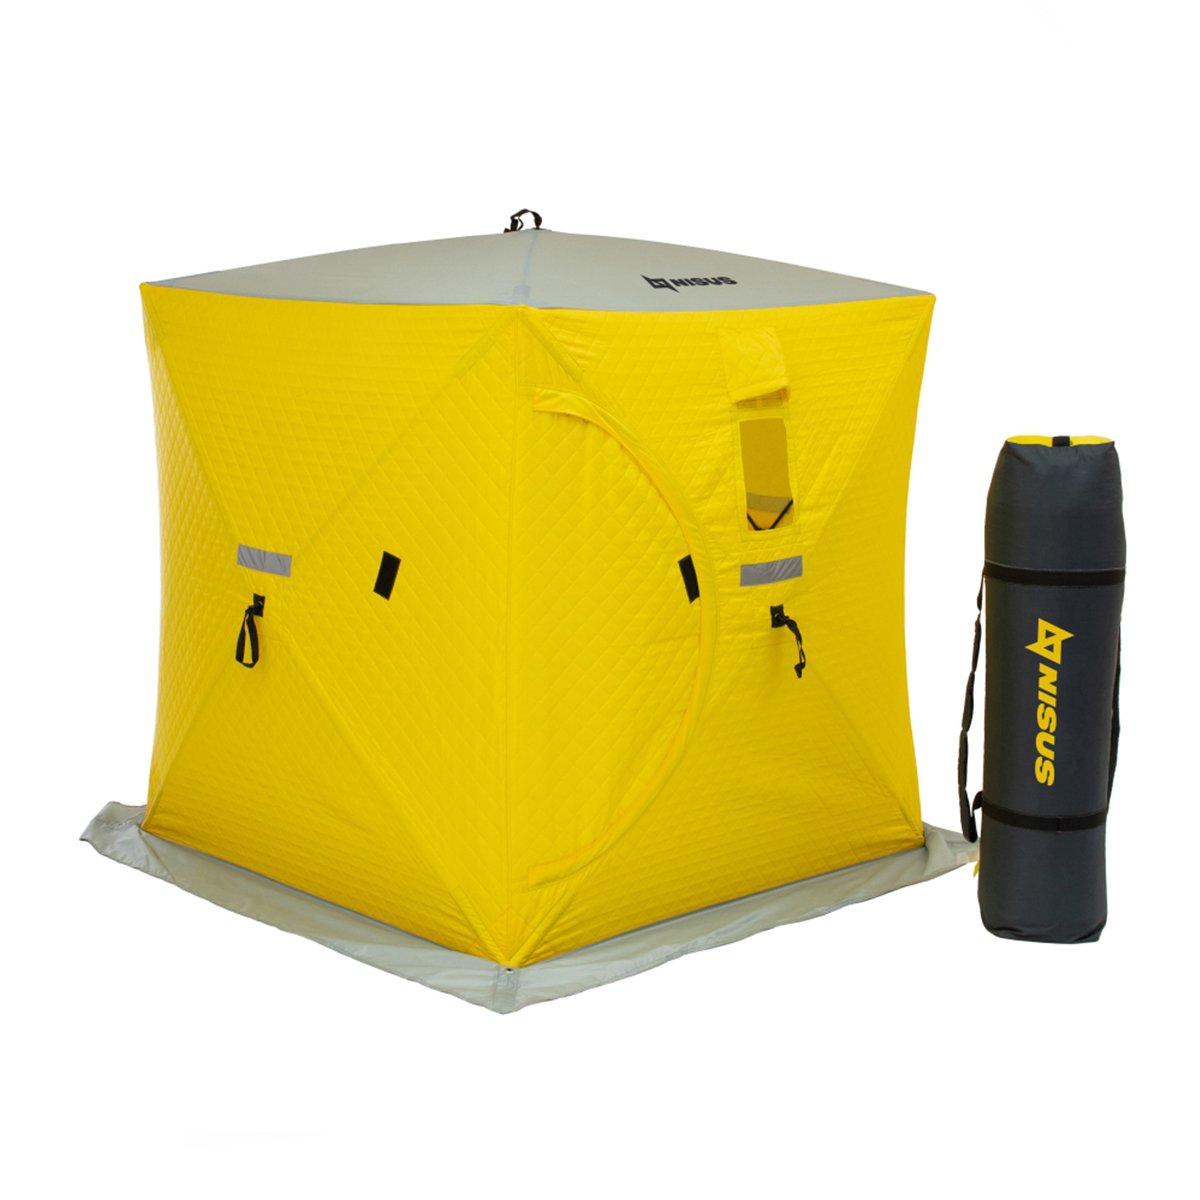 Cube Insulated Large Ice Fishing Shelter for 3 Persons has a carrying bag attached